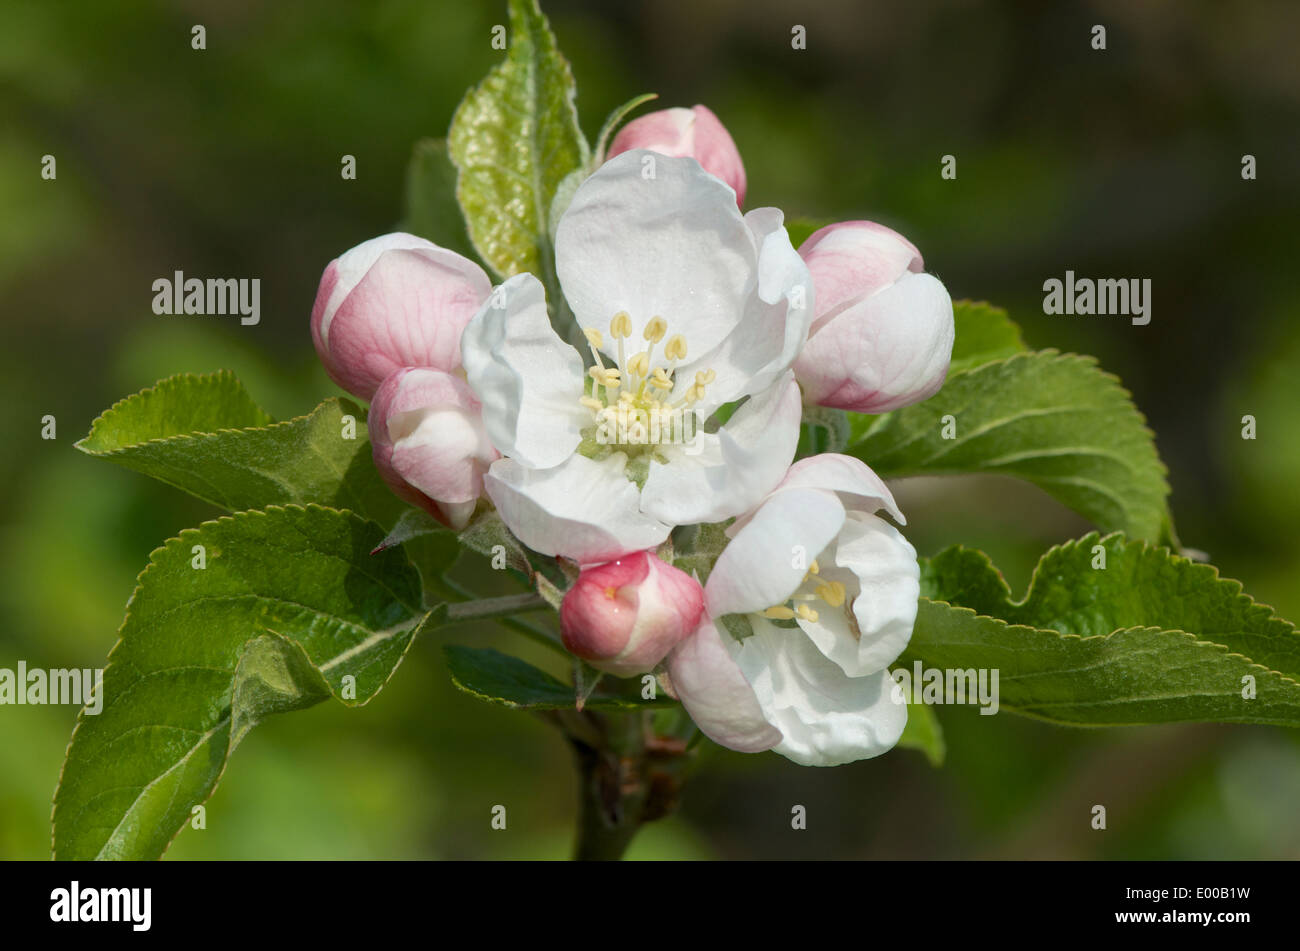 Pink and white Discovery apple blossom flowers Stock Photo